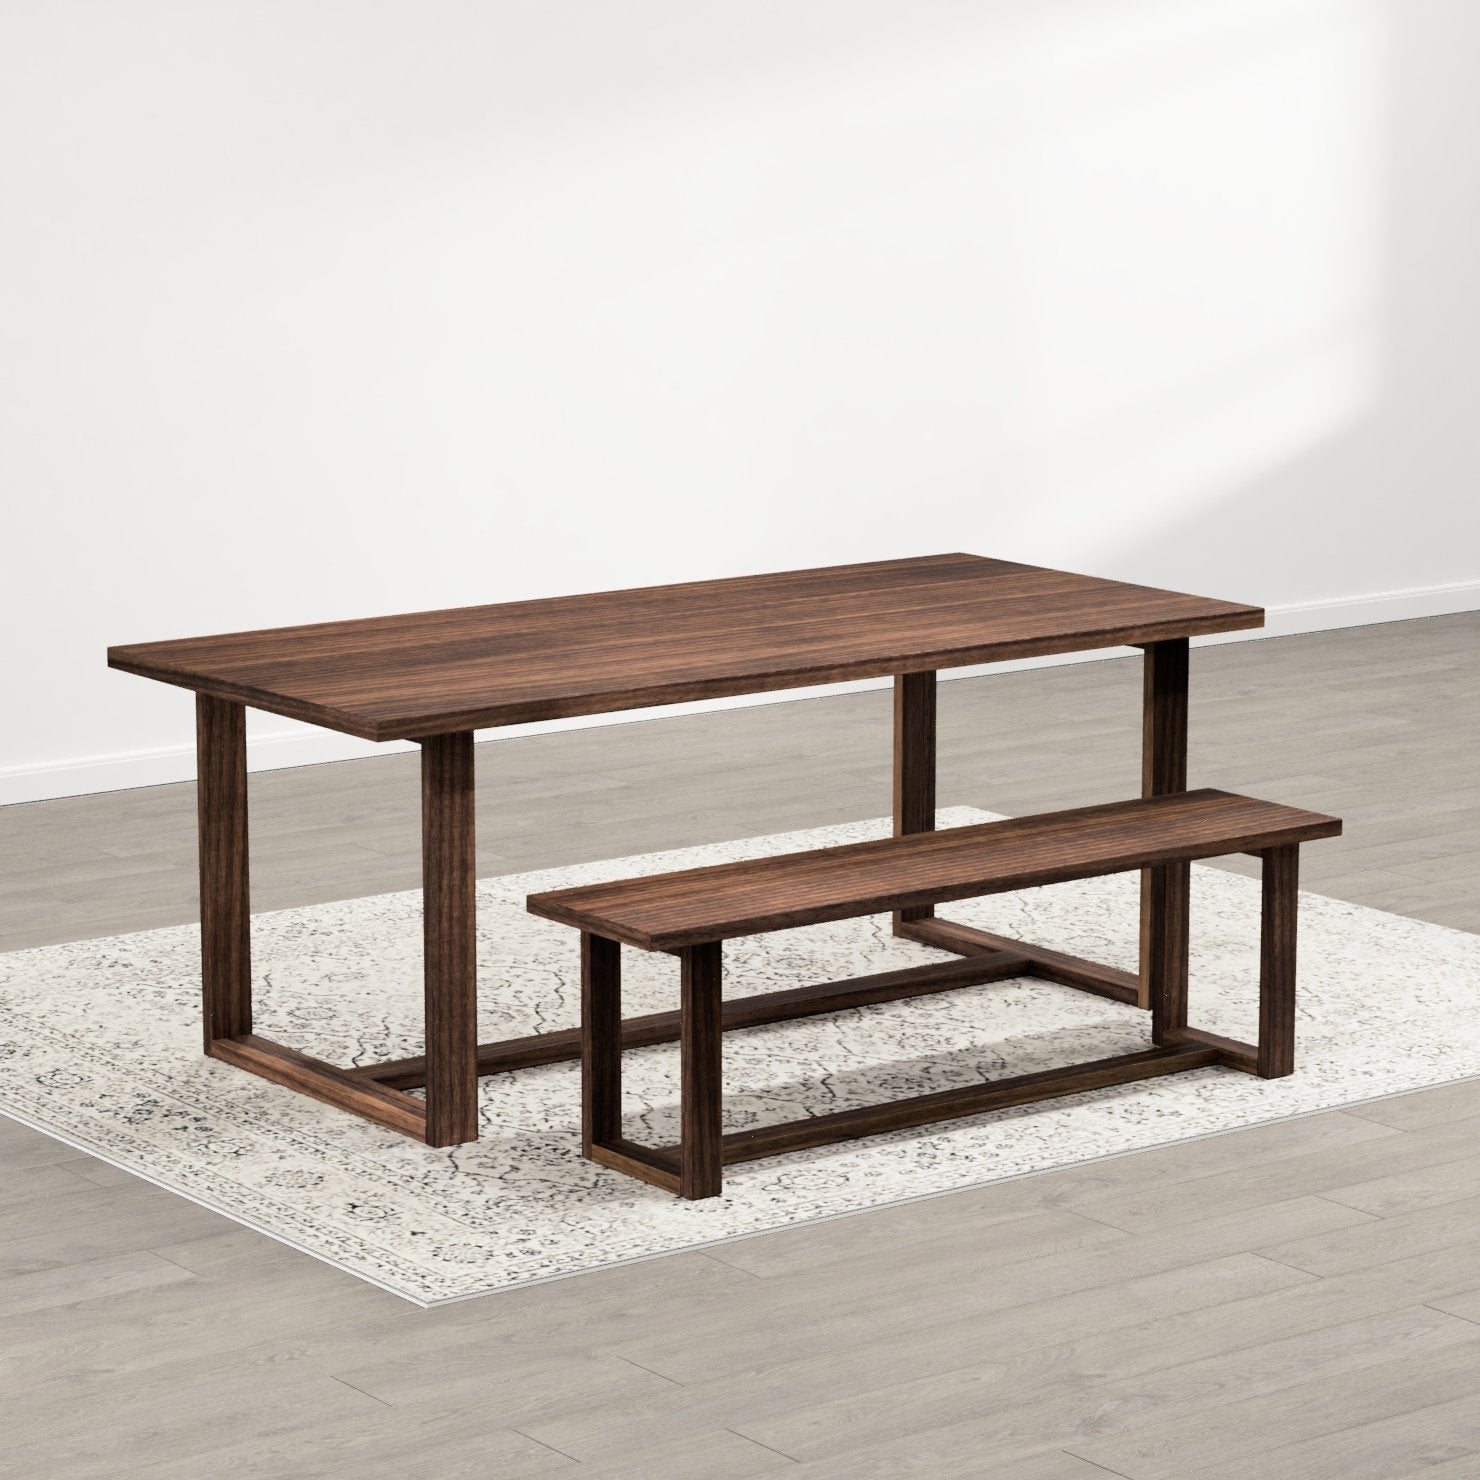 The Melissa Dining Table - FargoWoodworks